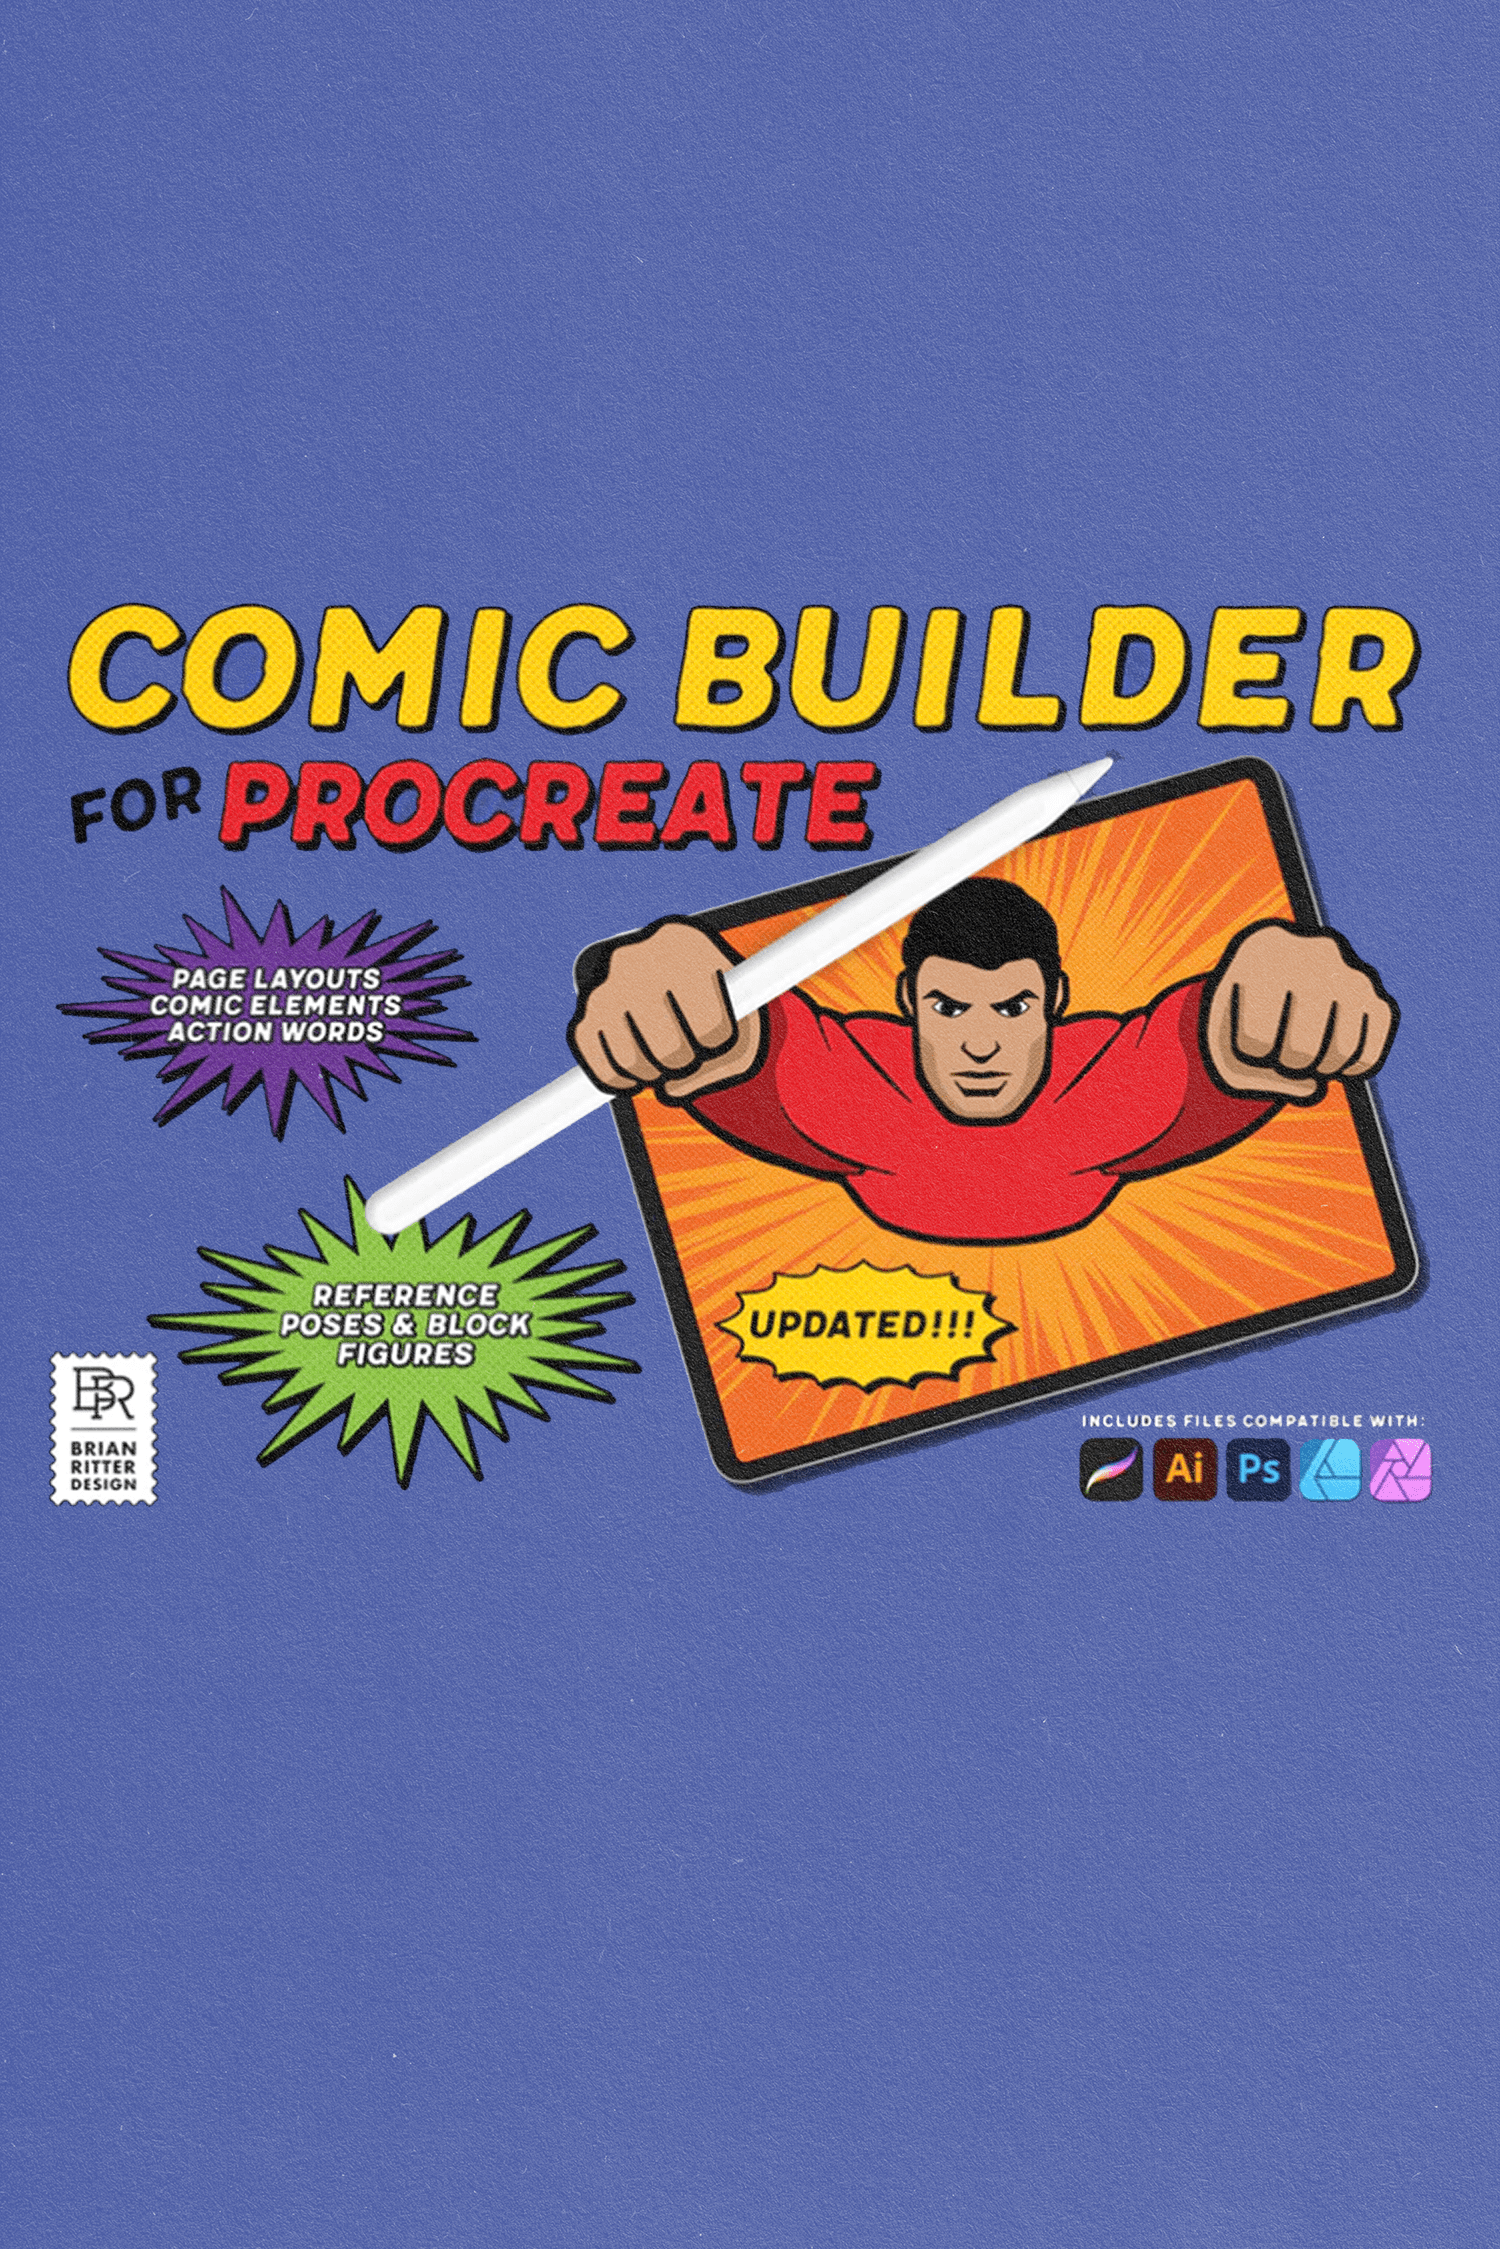 Comic Builder Toolkit by Brian Ritter Design